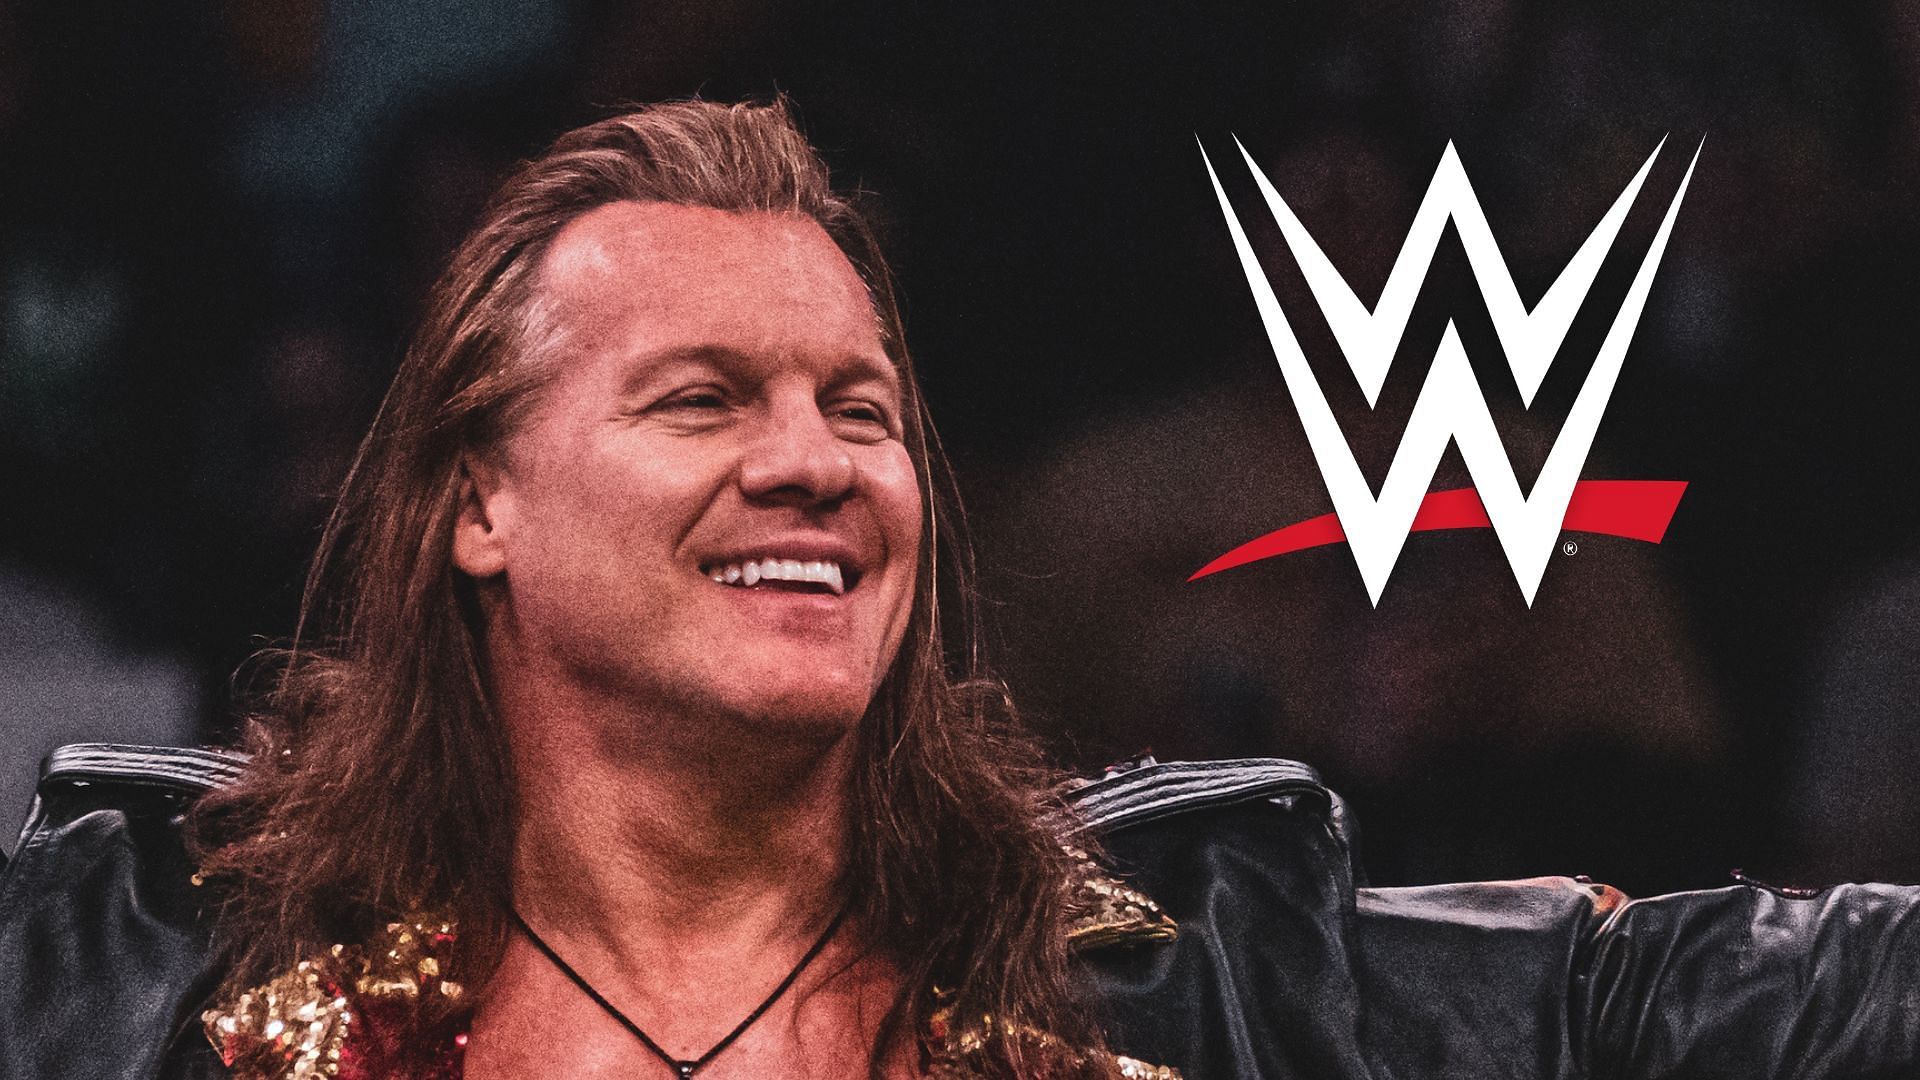 Did Chris Jericho have a different reason for his recent match on AEW Dynamite